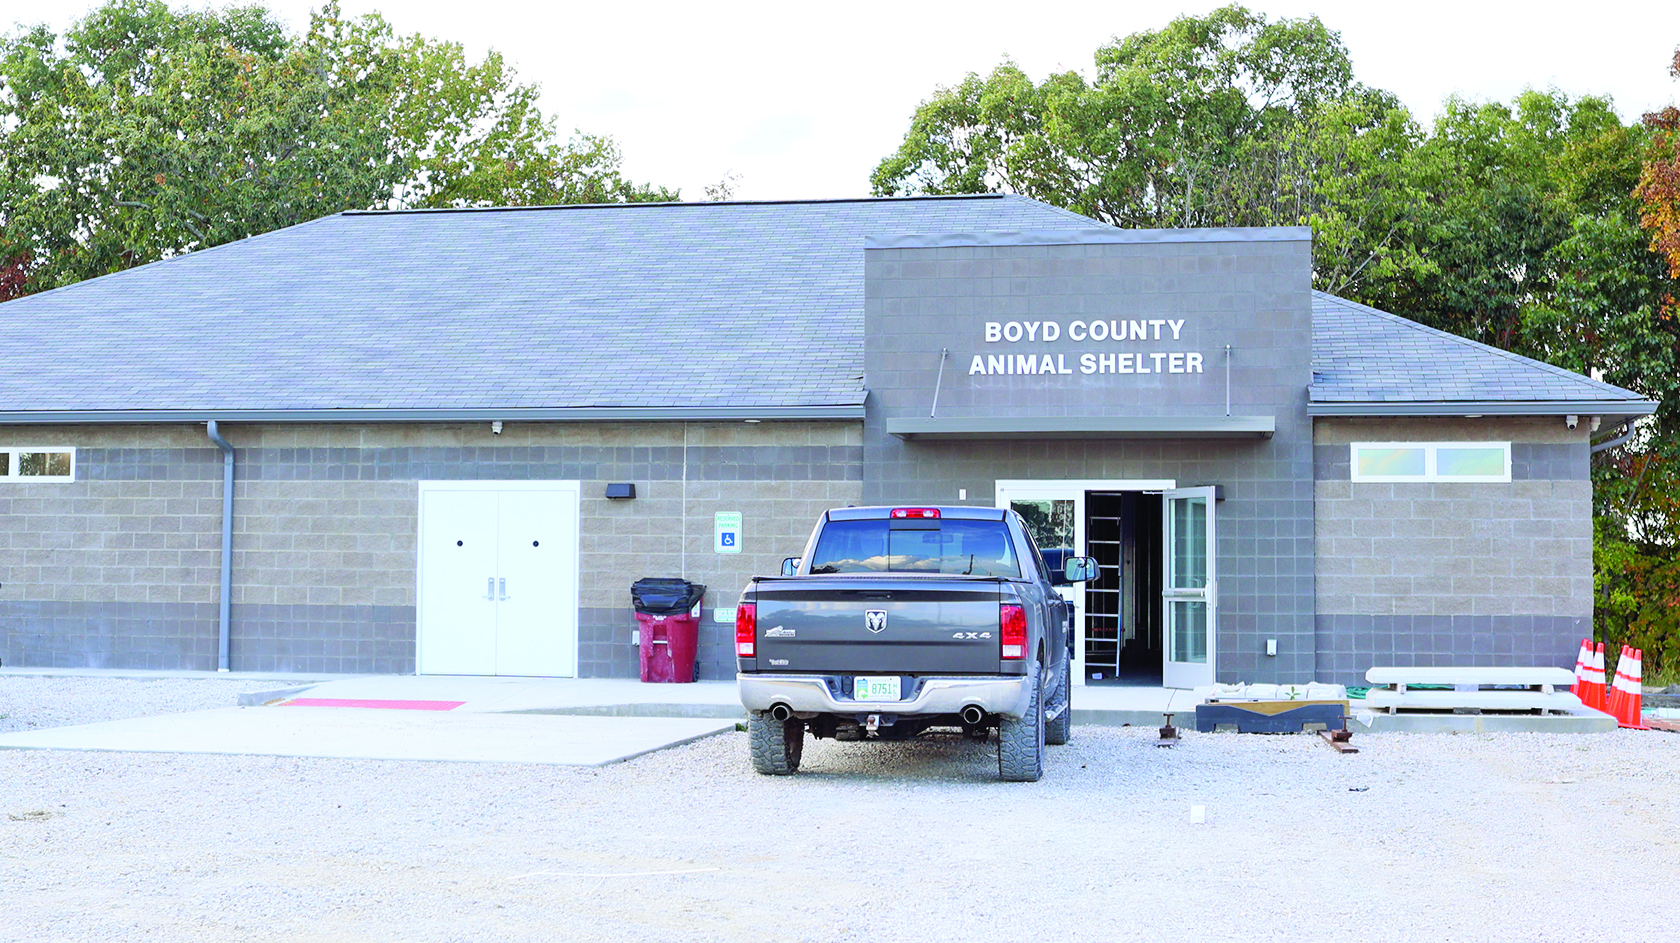 When Two Become One, Great Things Can Happen  AARF and Boyd County Animal Shelter Join Forces